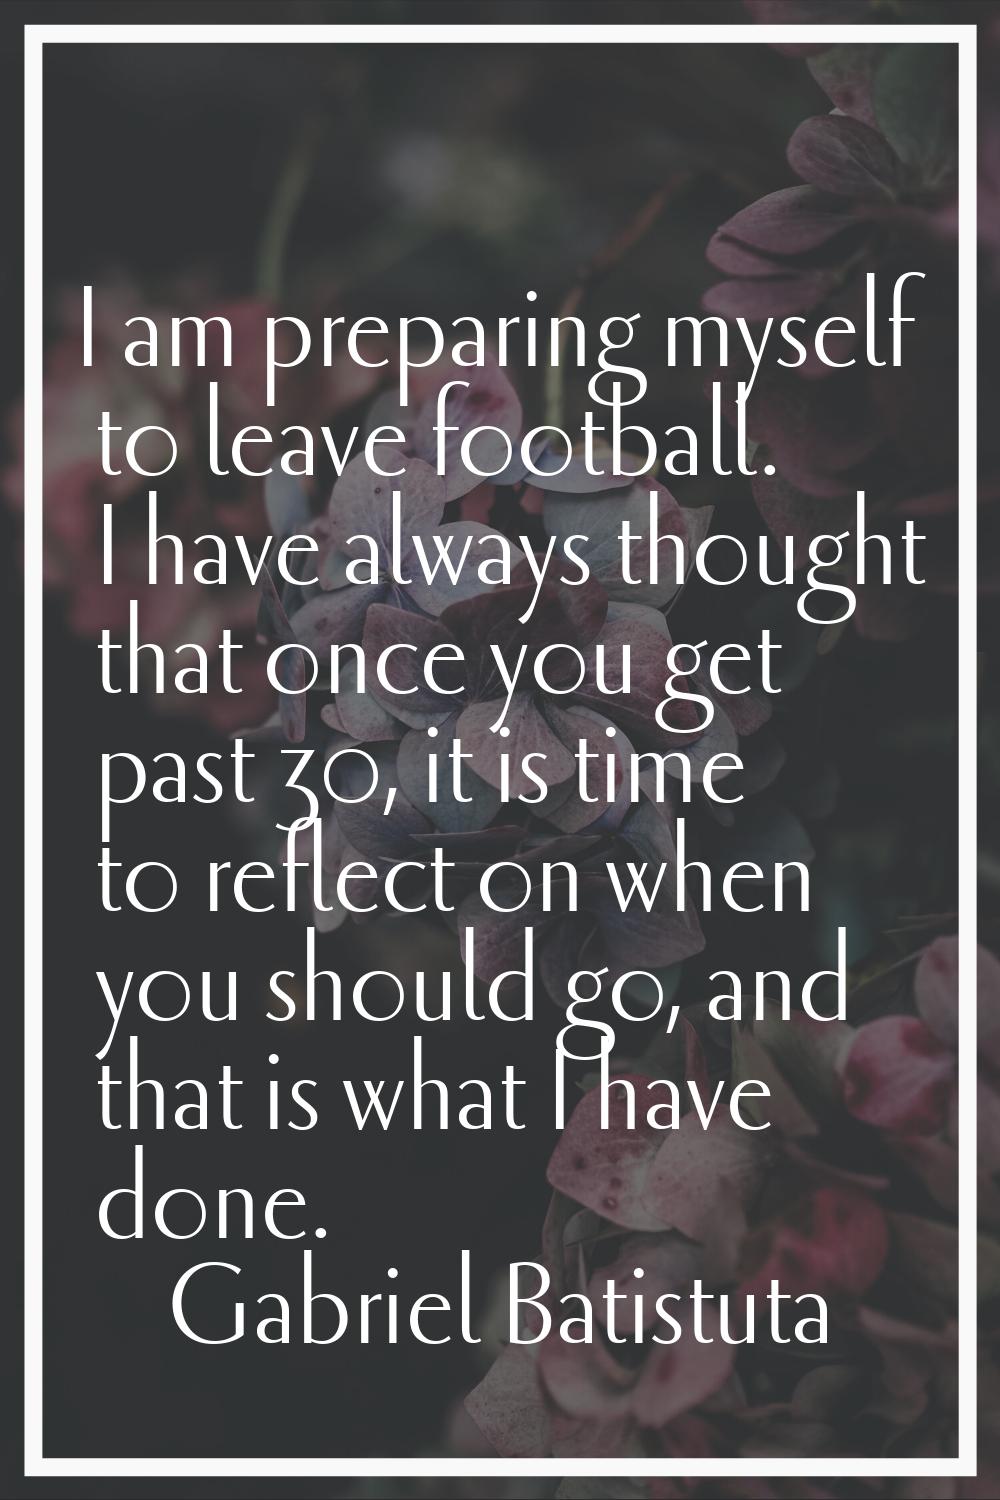 I am preparing myself to leave football. I have always thought that once you get past 30, it is tim